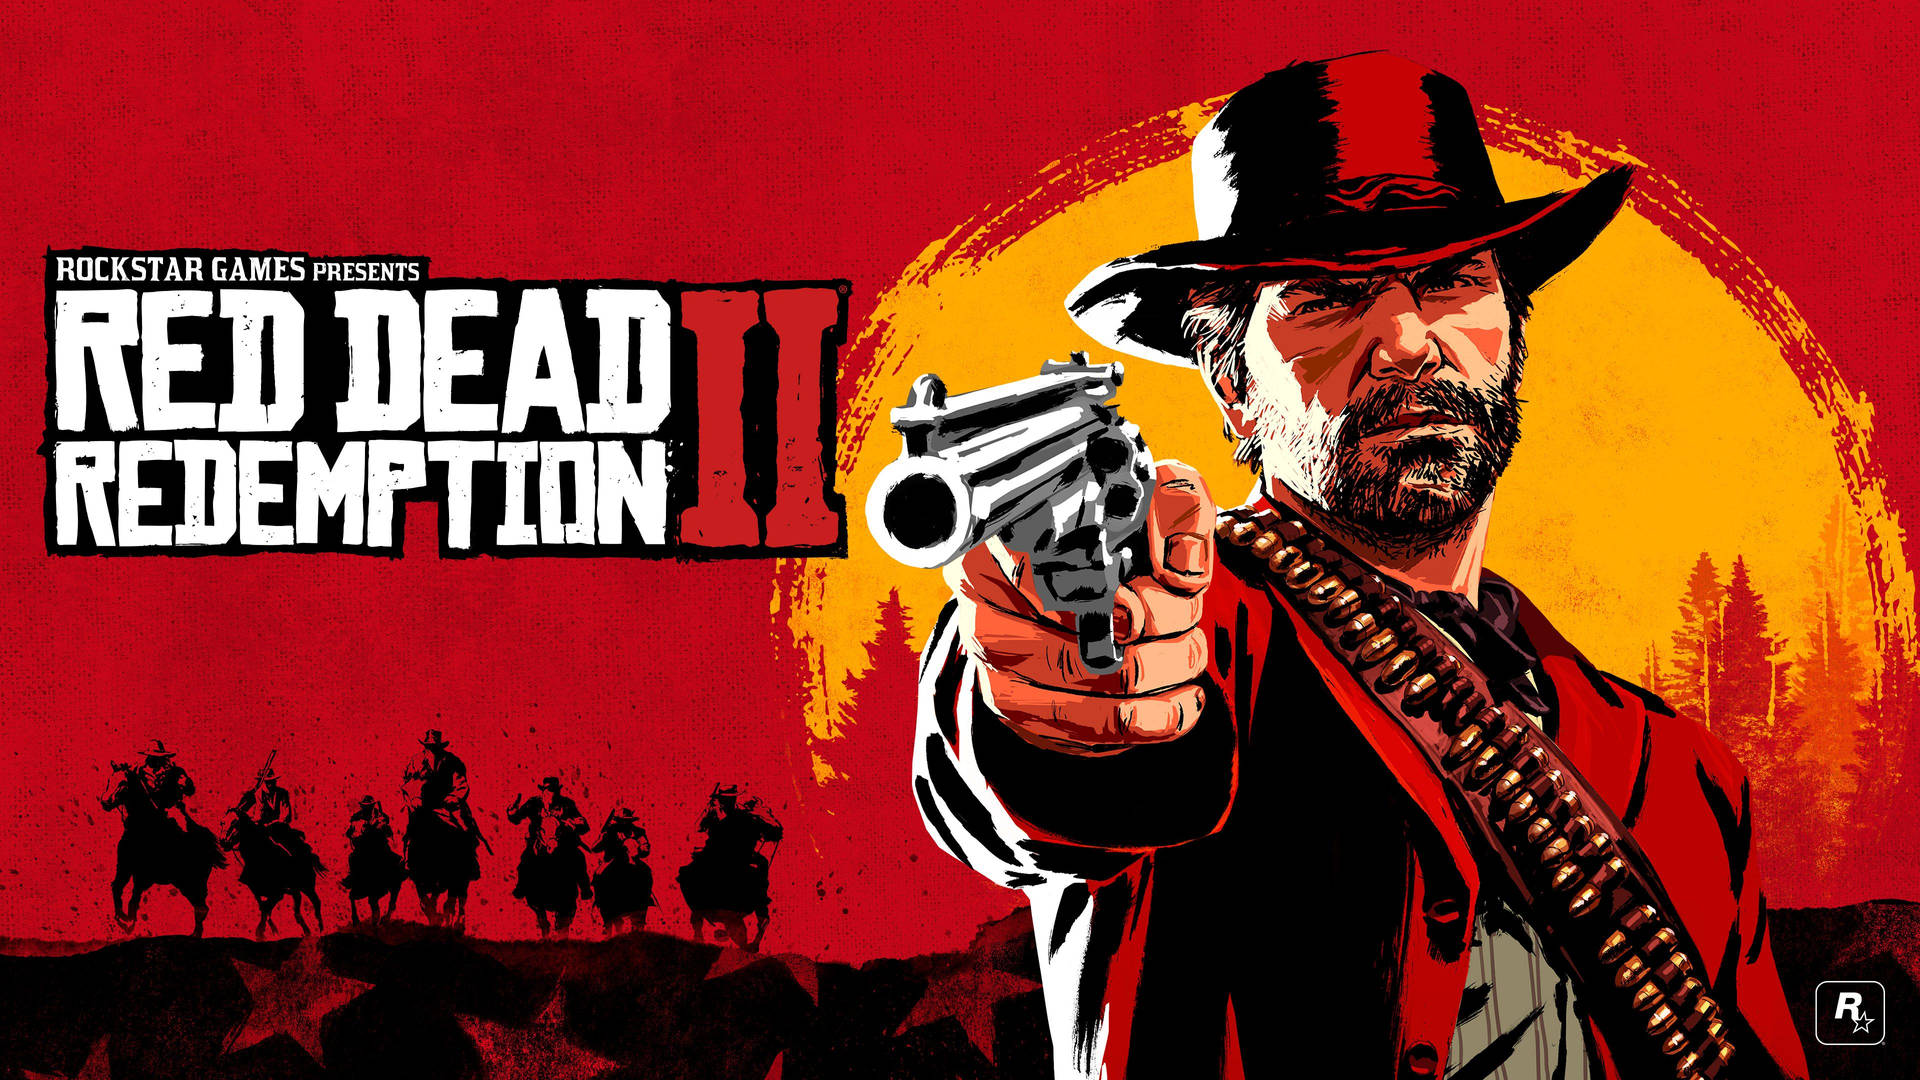 Red Dead Redemption 2 3840X2160 Wallpaper and Background Image